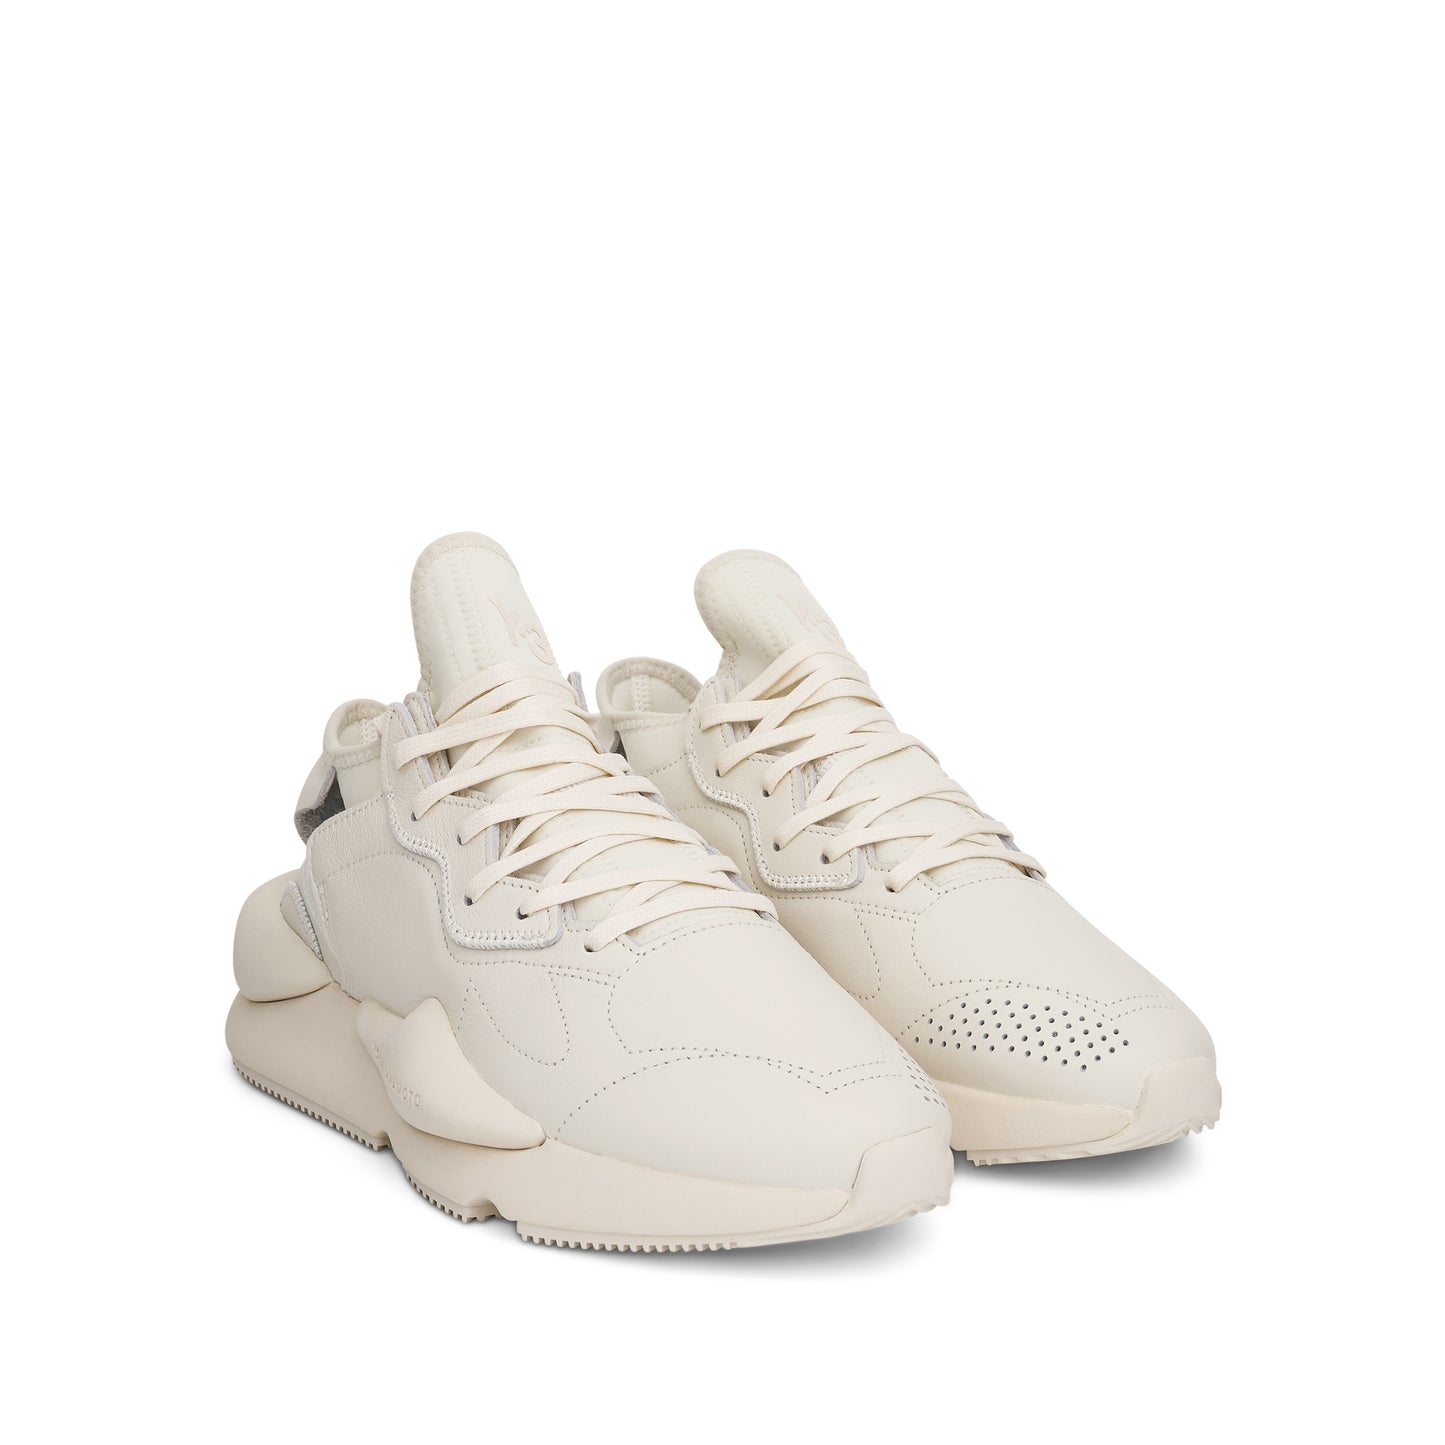 Kaiwa Sneakers in Off White